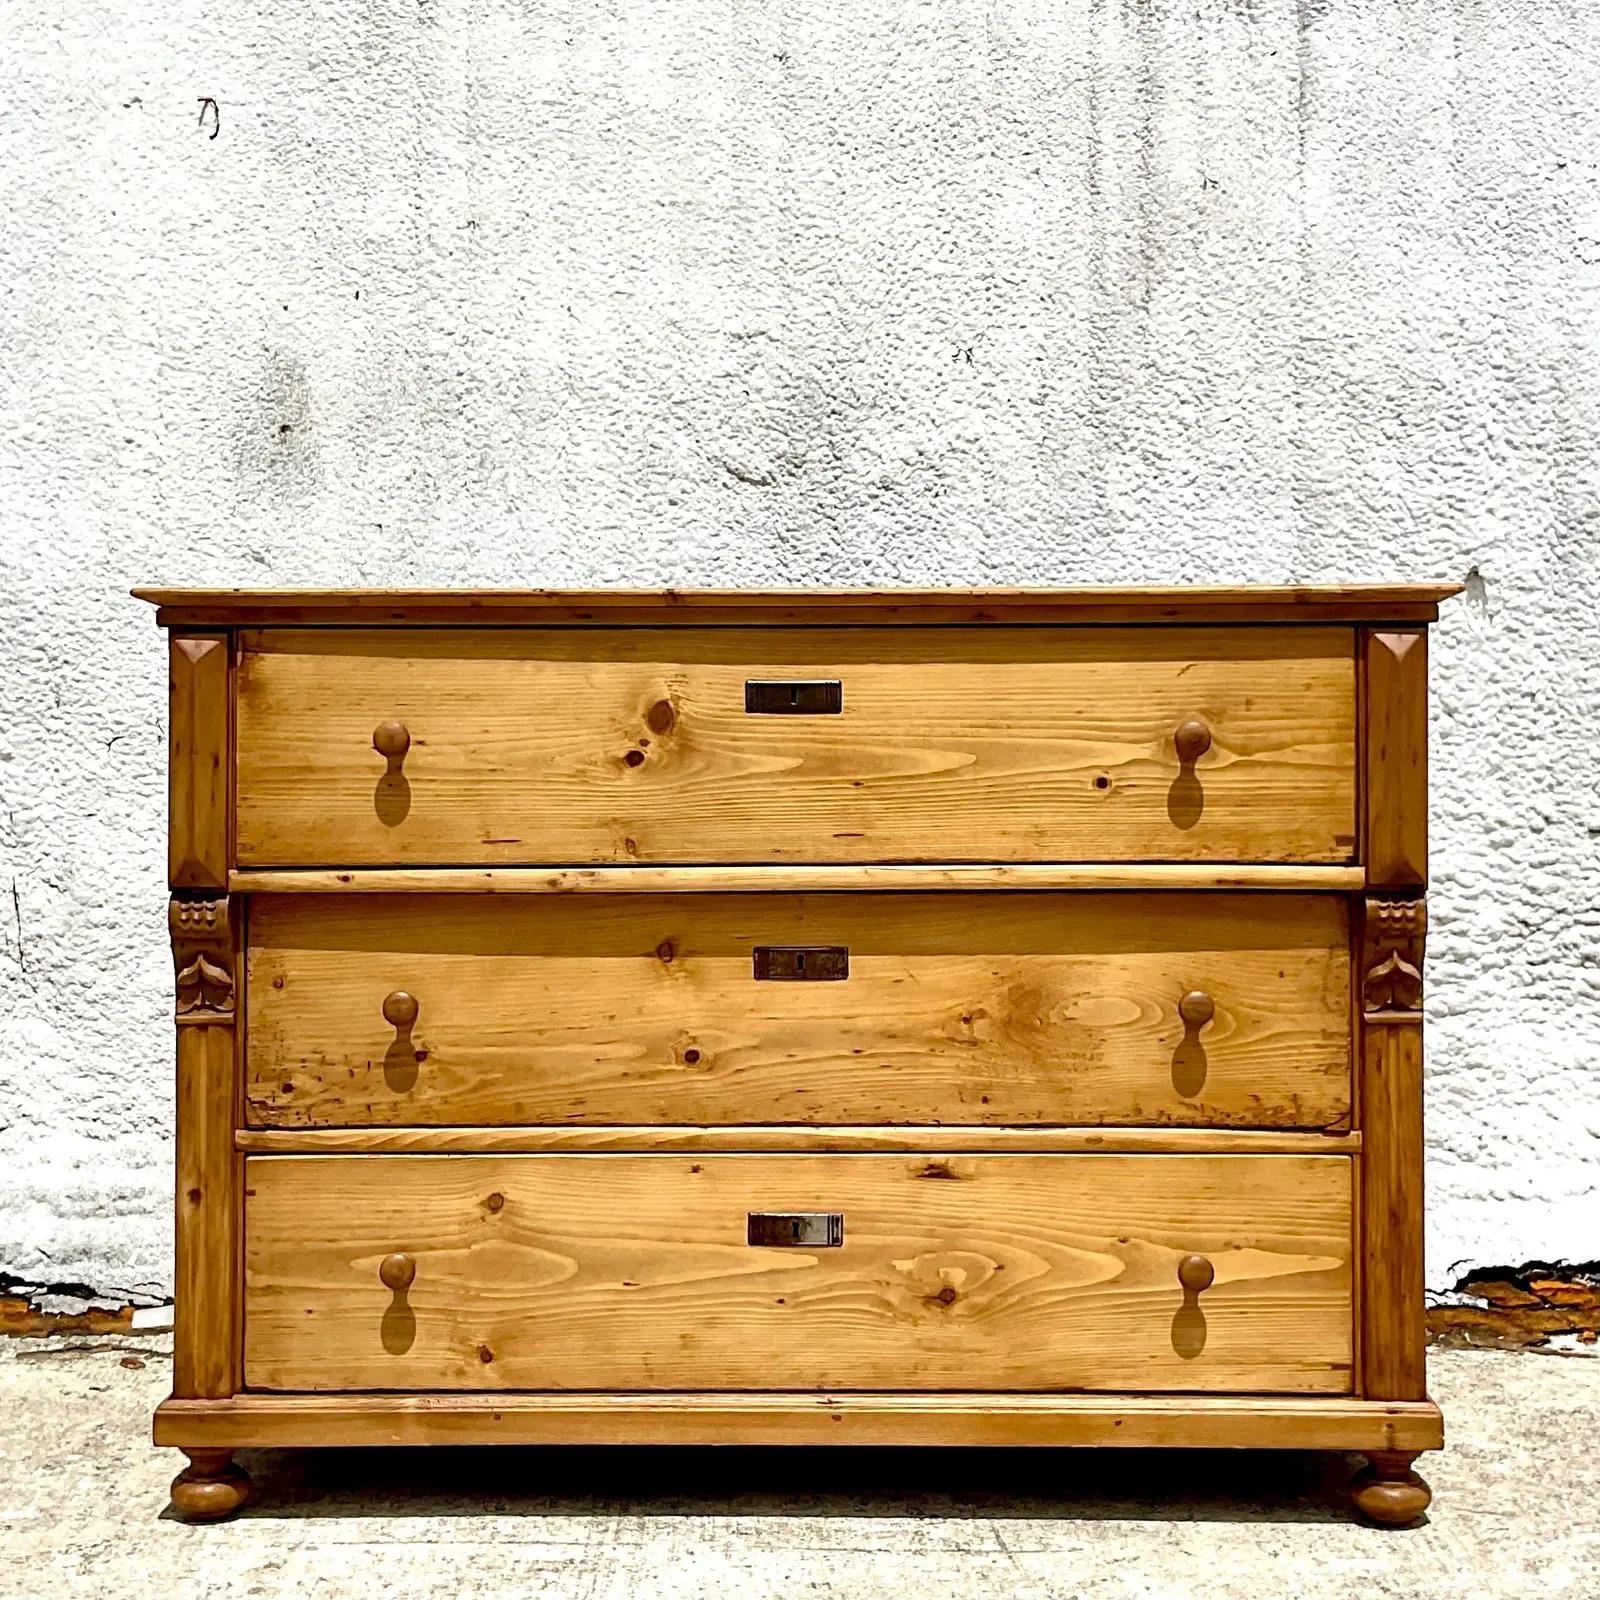 A stunning vintage Rustic chest of drawers. A beautiful simple shape with carved column on the sides. Big and impressive. Perfect as a chest or even as an foyer console. Acquired from a Palm Beach estate.